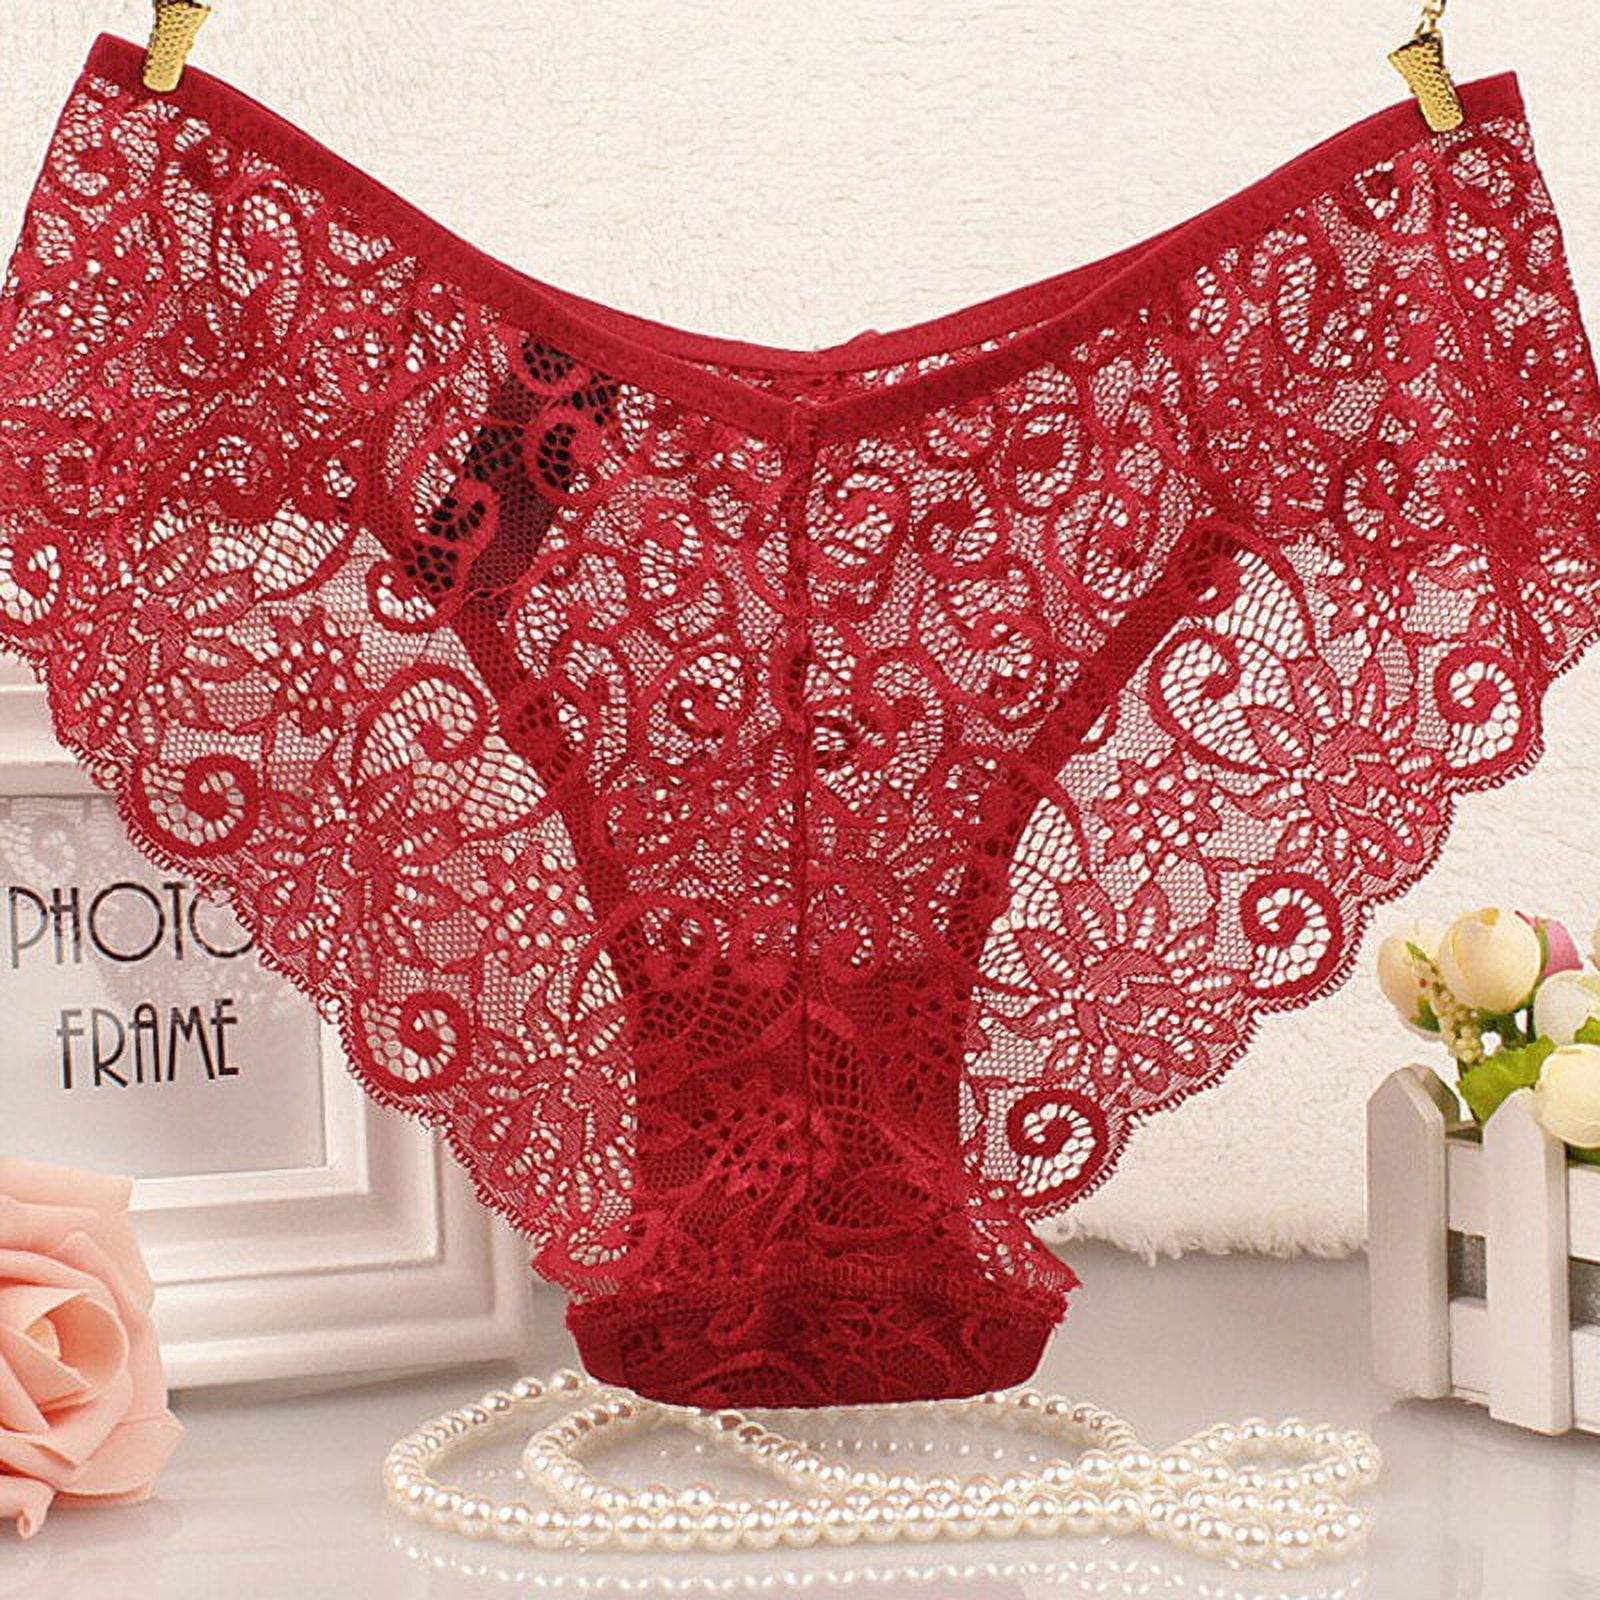 Women's Sexy Full Lace Panties S-XL 5Colors High-Crotch